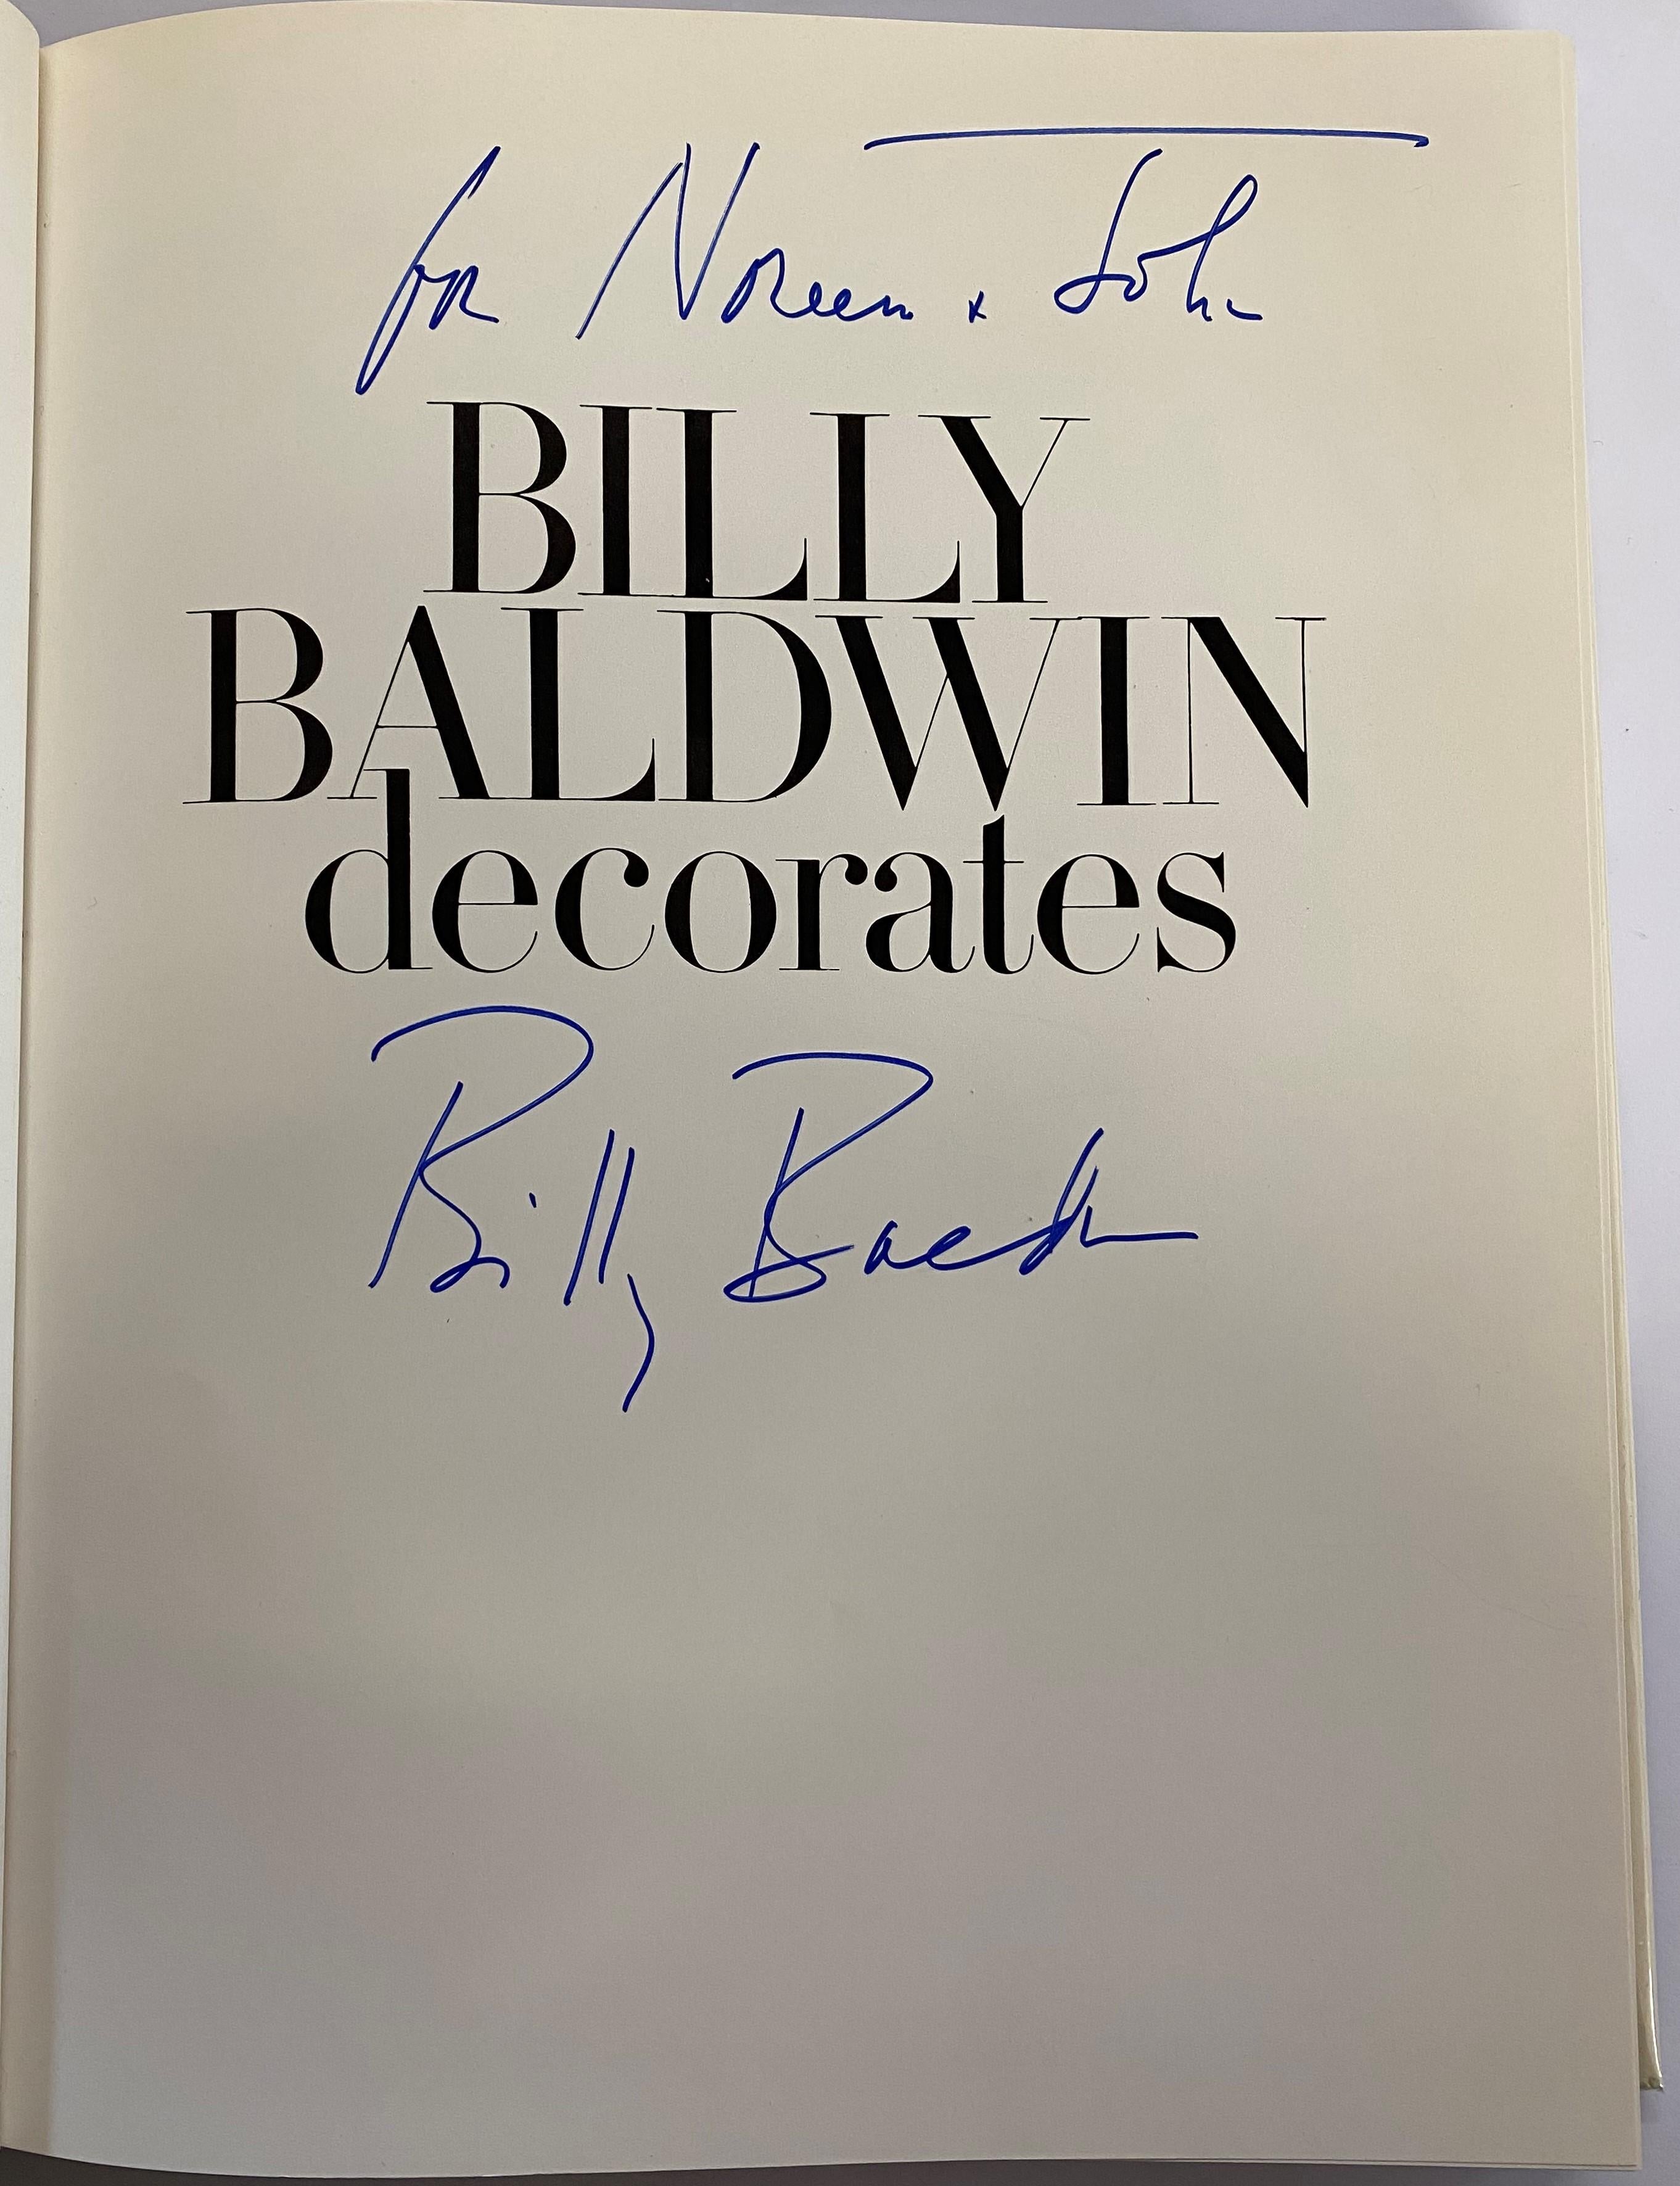 Billy Baldwin is the dean of American Decorators and one of the world's most versatile designers (his work ranges from a one-room city apartment to a 7,000-acre ranch). In Billy Baldwin Decorates, he tells you how to decorate your house to suit you,